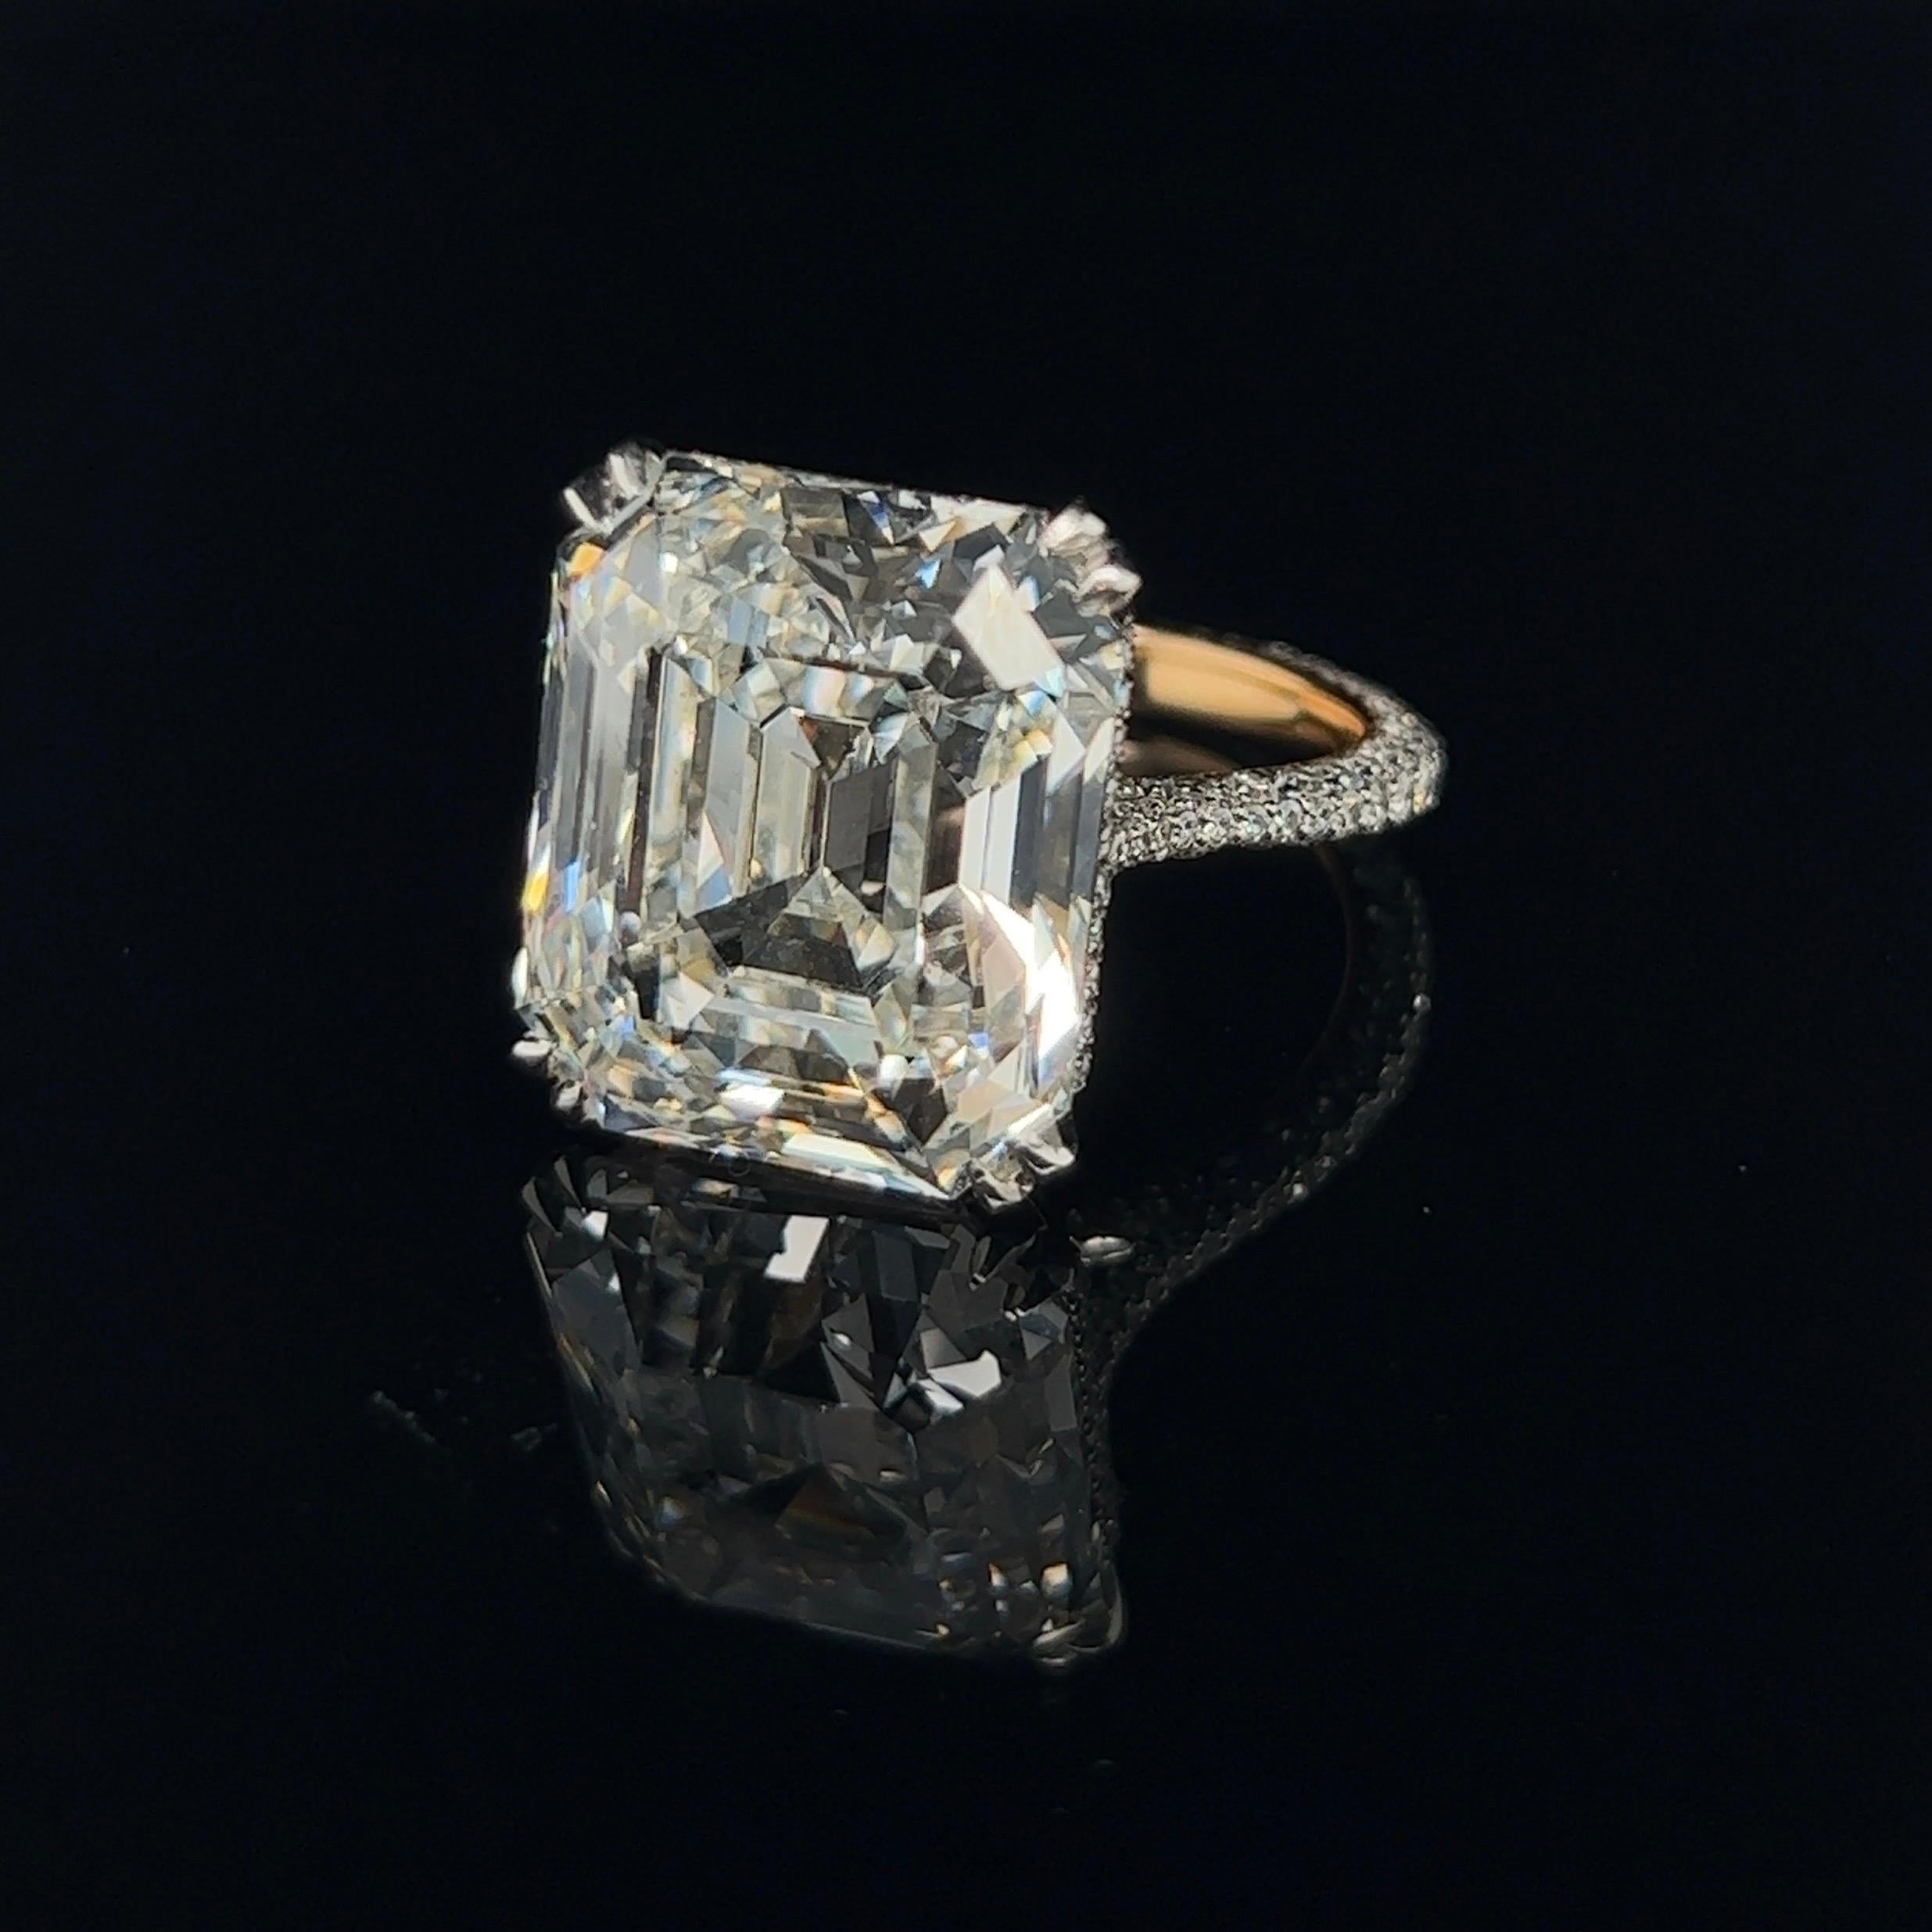 Emerald Cut GIA Certified 15.87 Carat Emerald-Cut Diamond Solitaire Engagement Ring For Sale